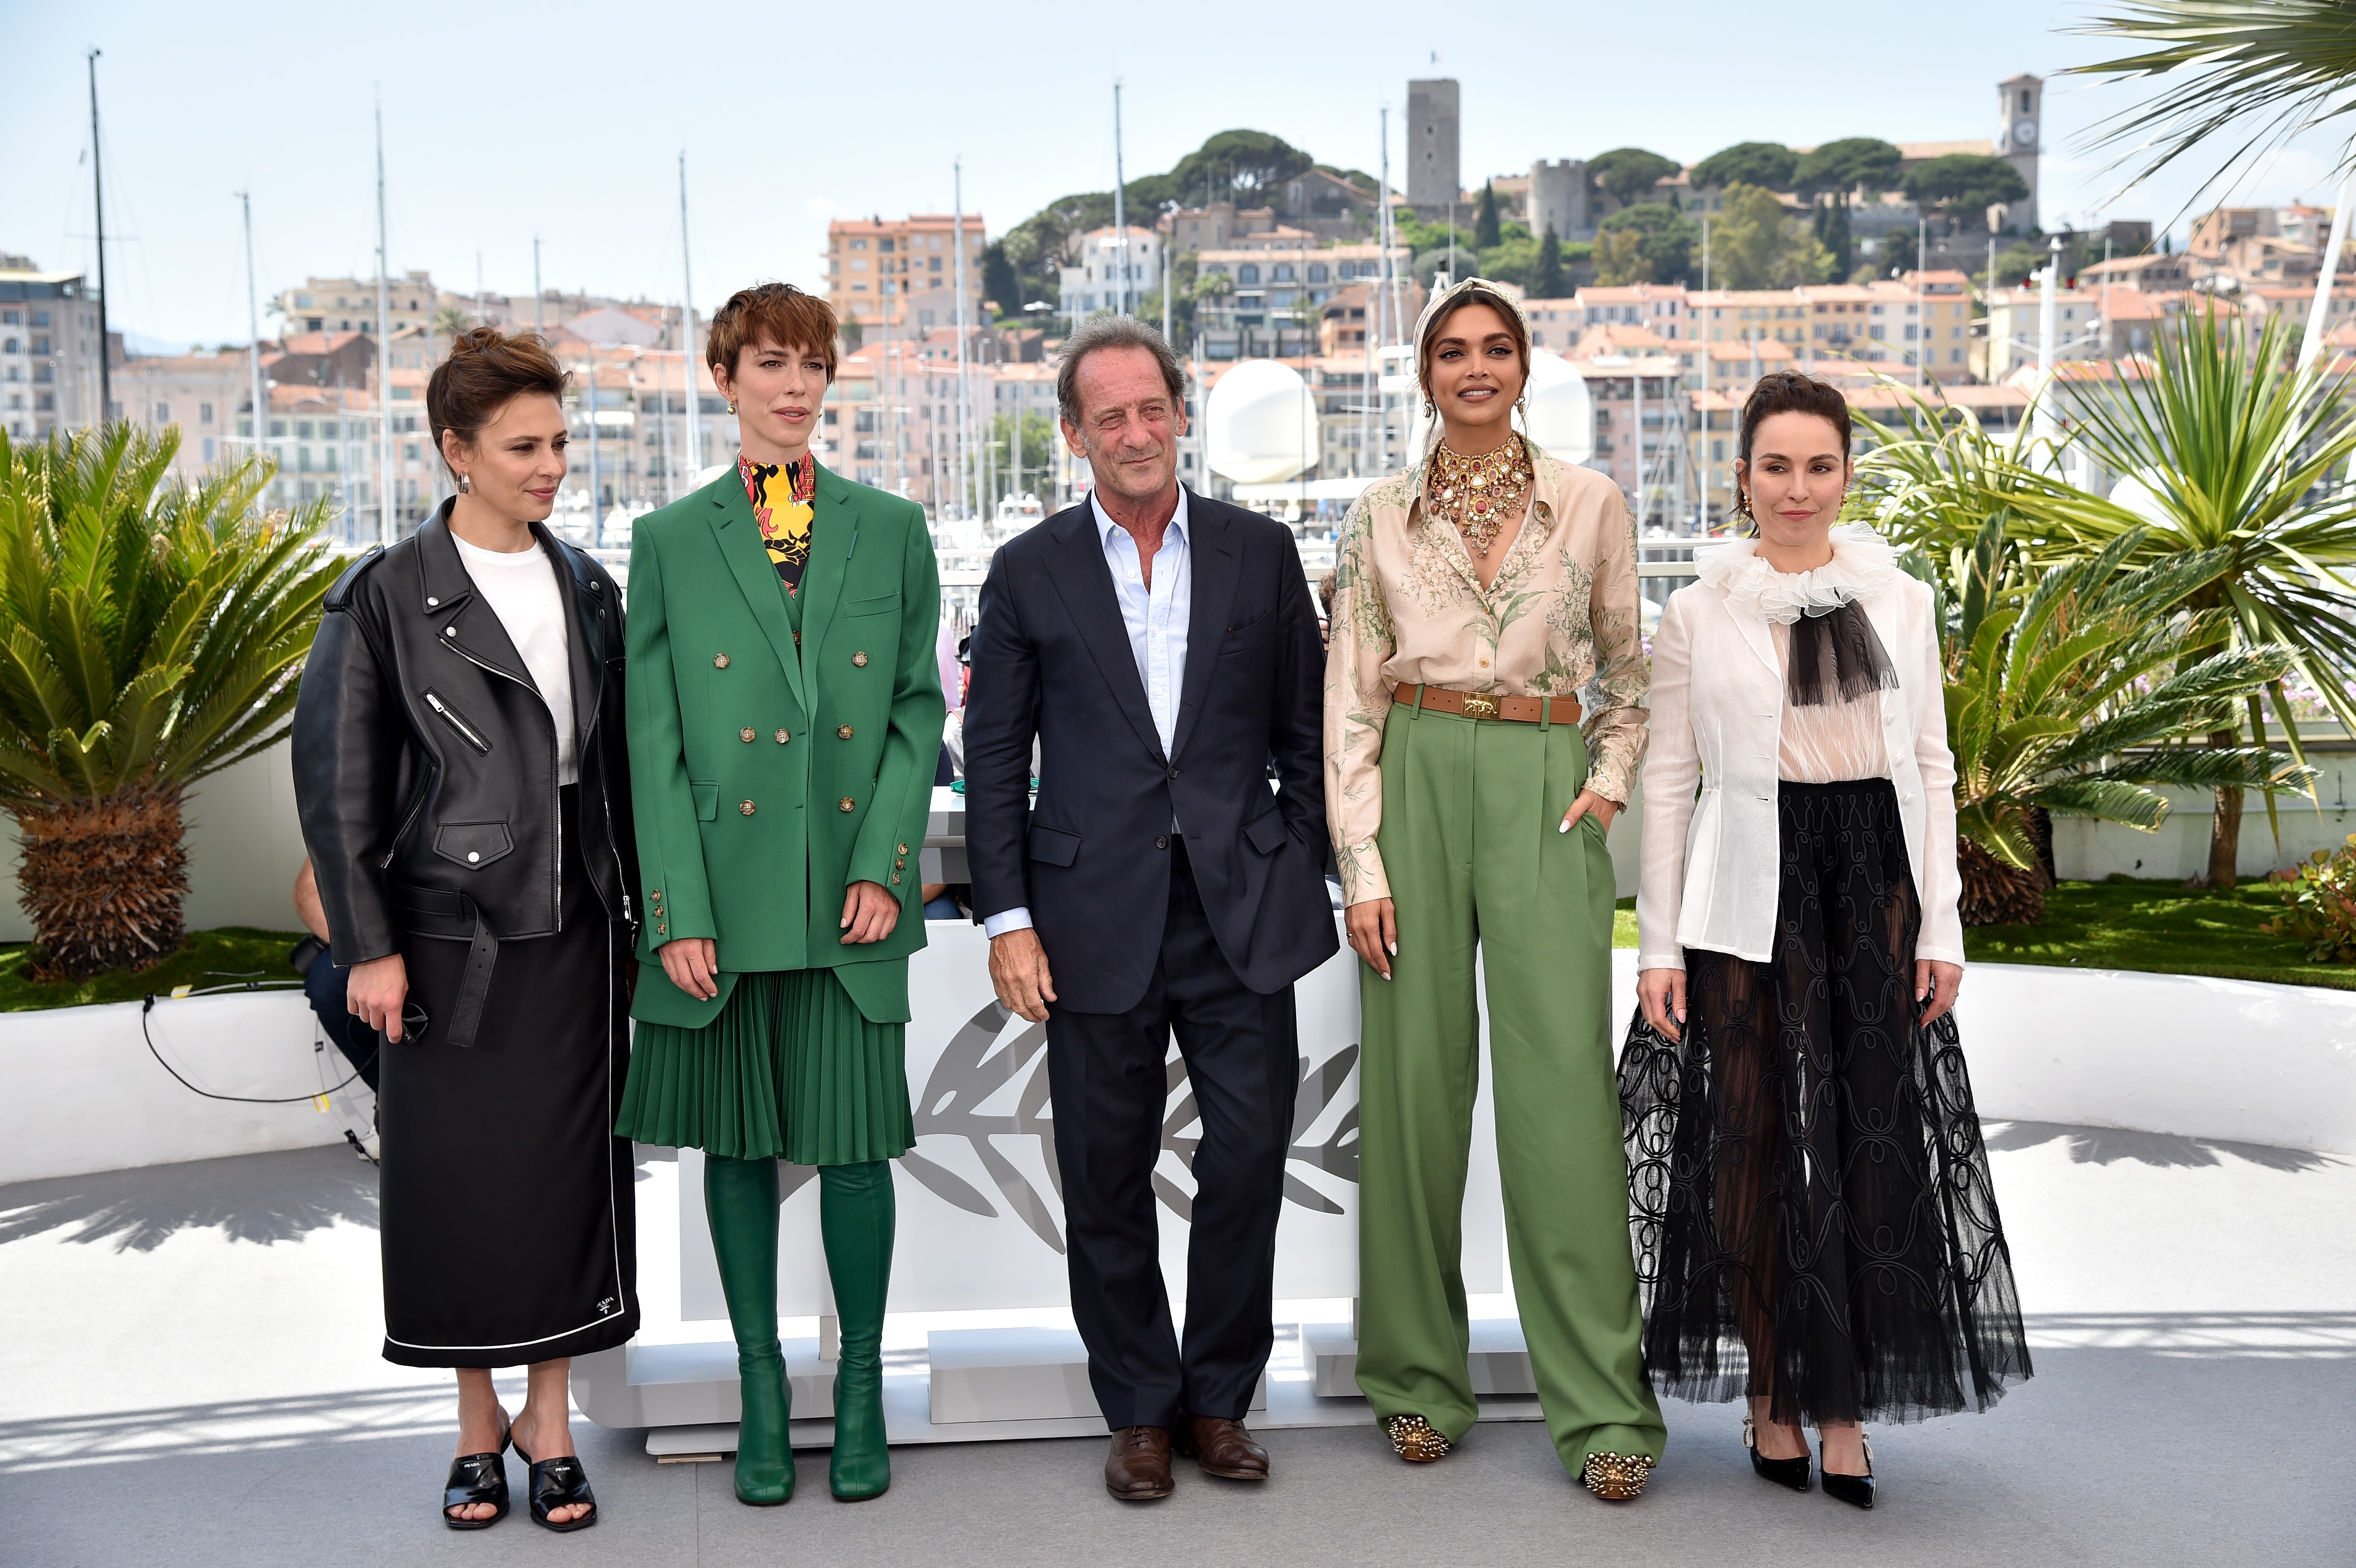 CANNES, FRANCE - MAY 17: (L to R) Jasmine Trinca, Rebecca Hall, Vincent Lindon, Deepika Padukone and Noomi Rapace attend the photocall for the Jury during the 75th annual Cannes film festival at Palais des Festivals on May 17, 2022 in Cannes, France. atte (Foto: Getty Images)